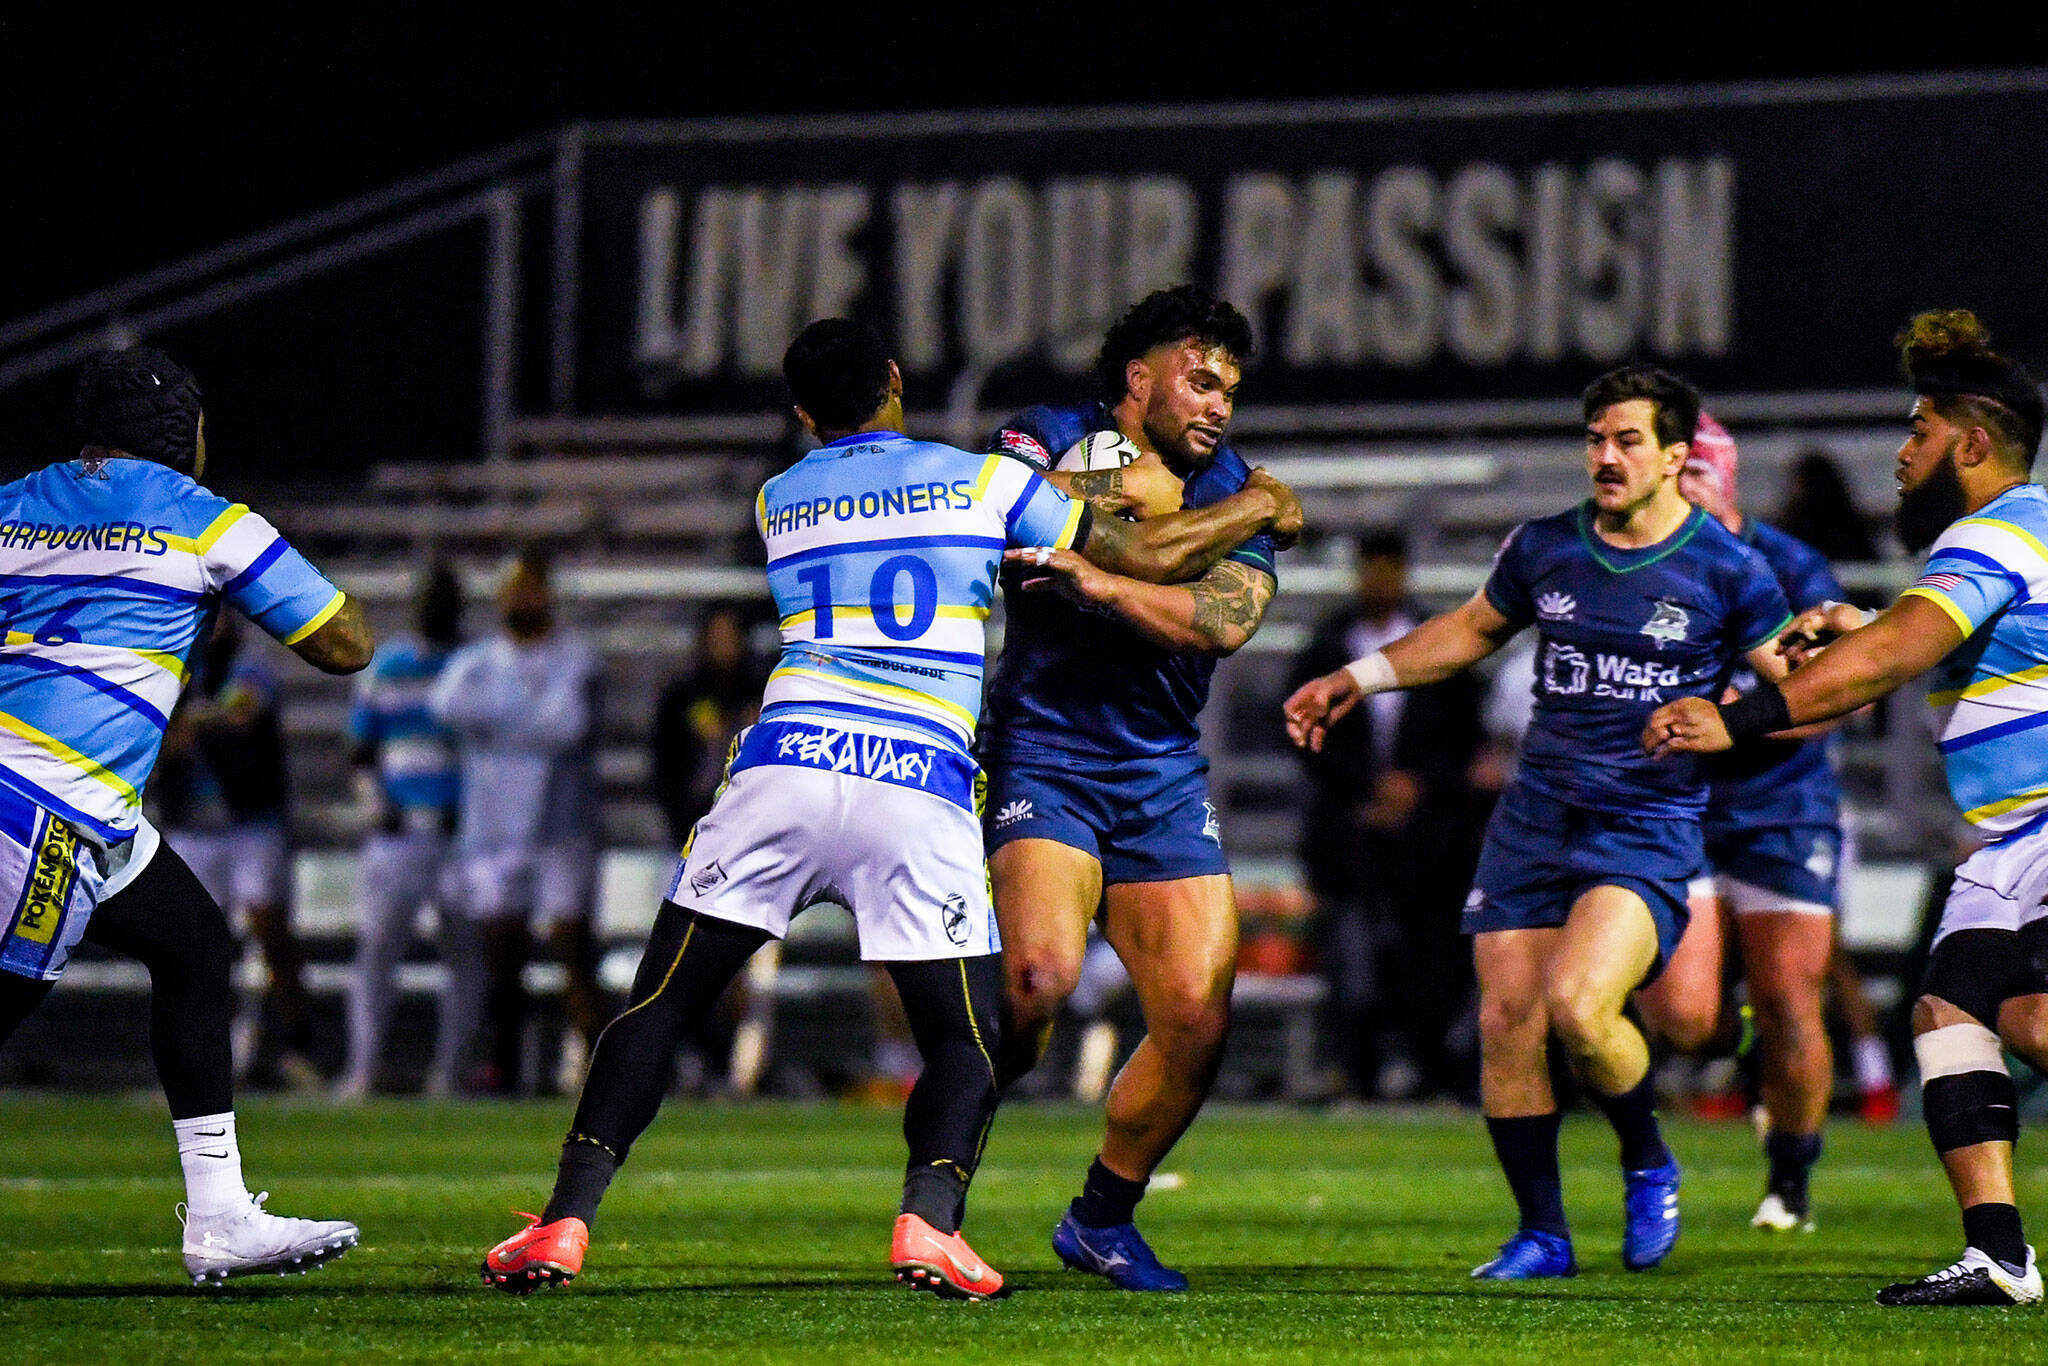 Taniela Tupou, an Archbishop Murphy High School graduate, plays for the Seattle Seawolves professional rugby team during a game against the Hartford Harpooners. (Seattle Seawolves)